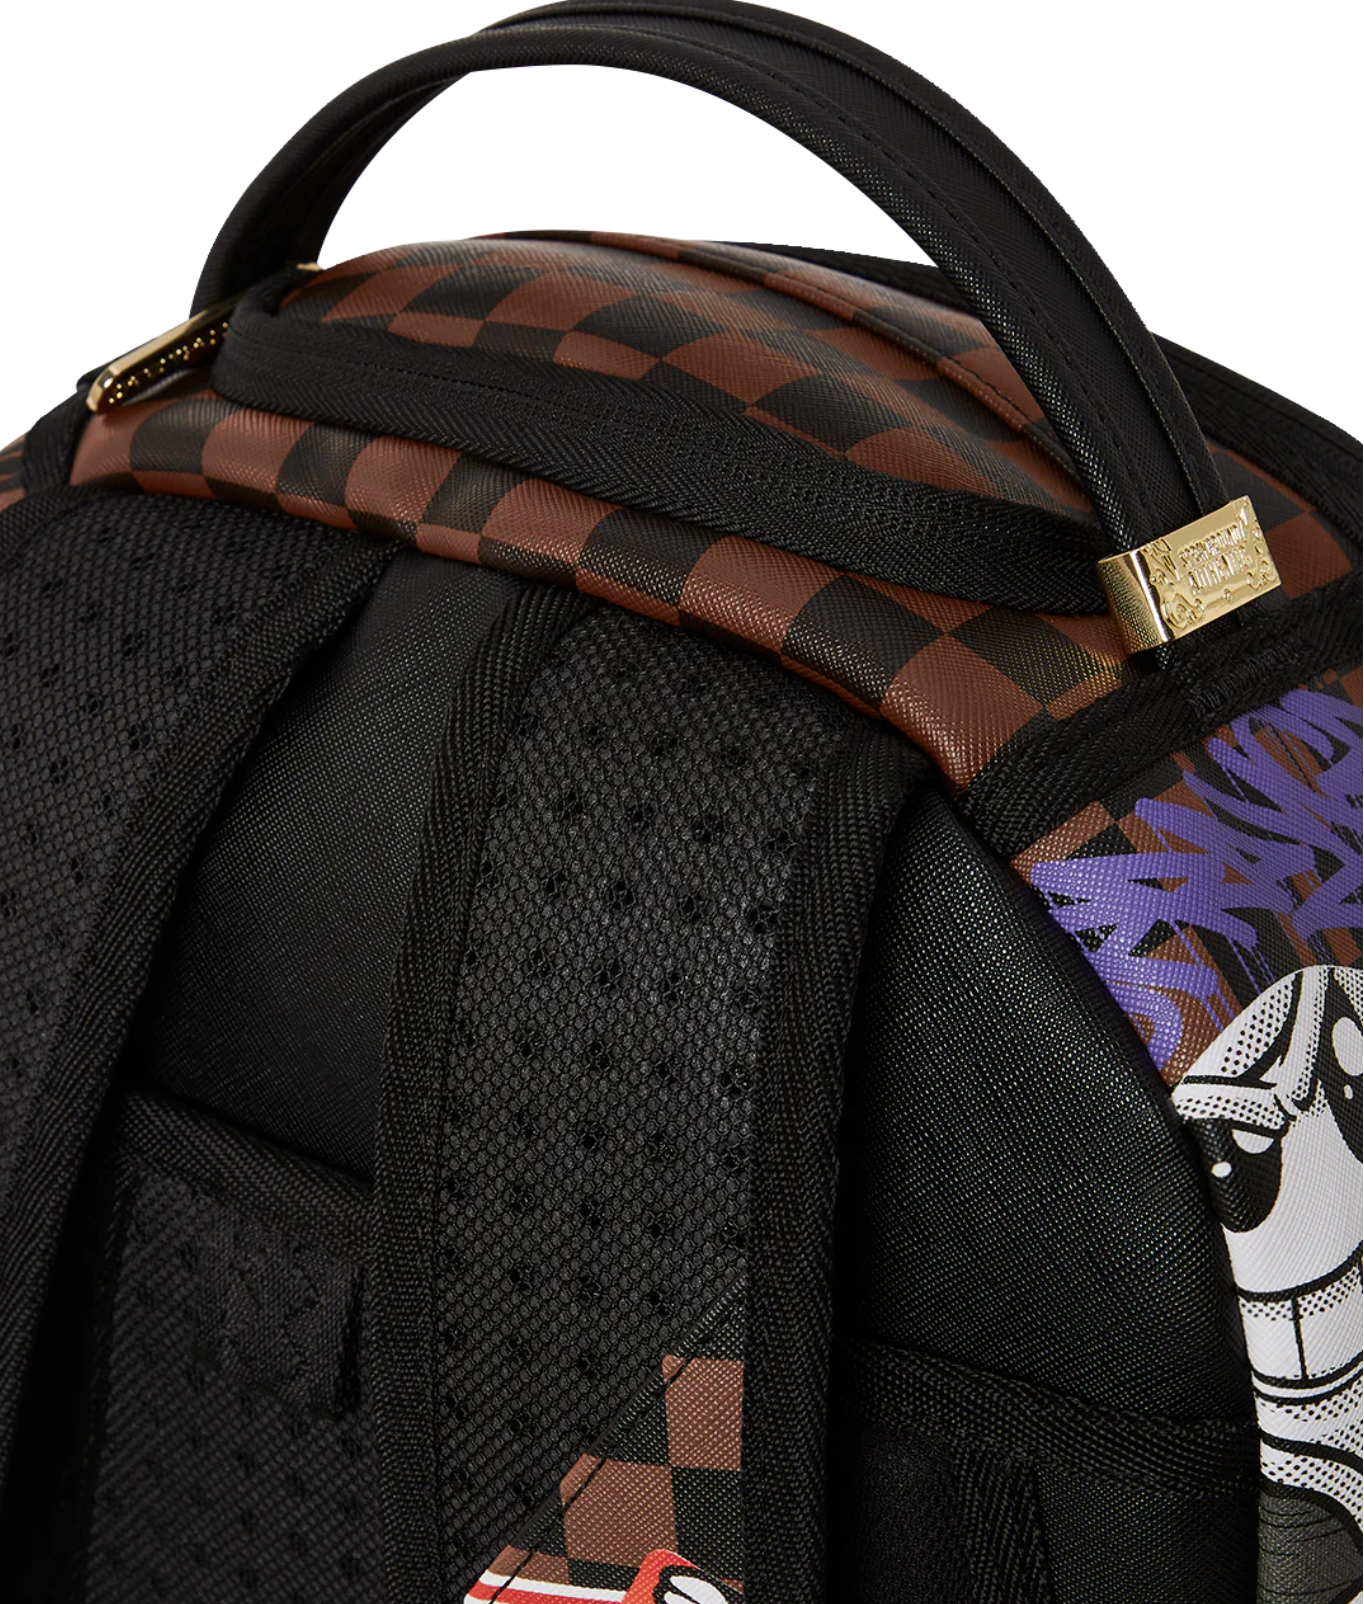 Sprayground | Sharks in Paris the Rizz backpack